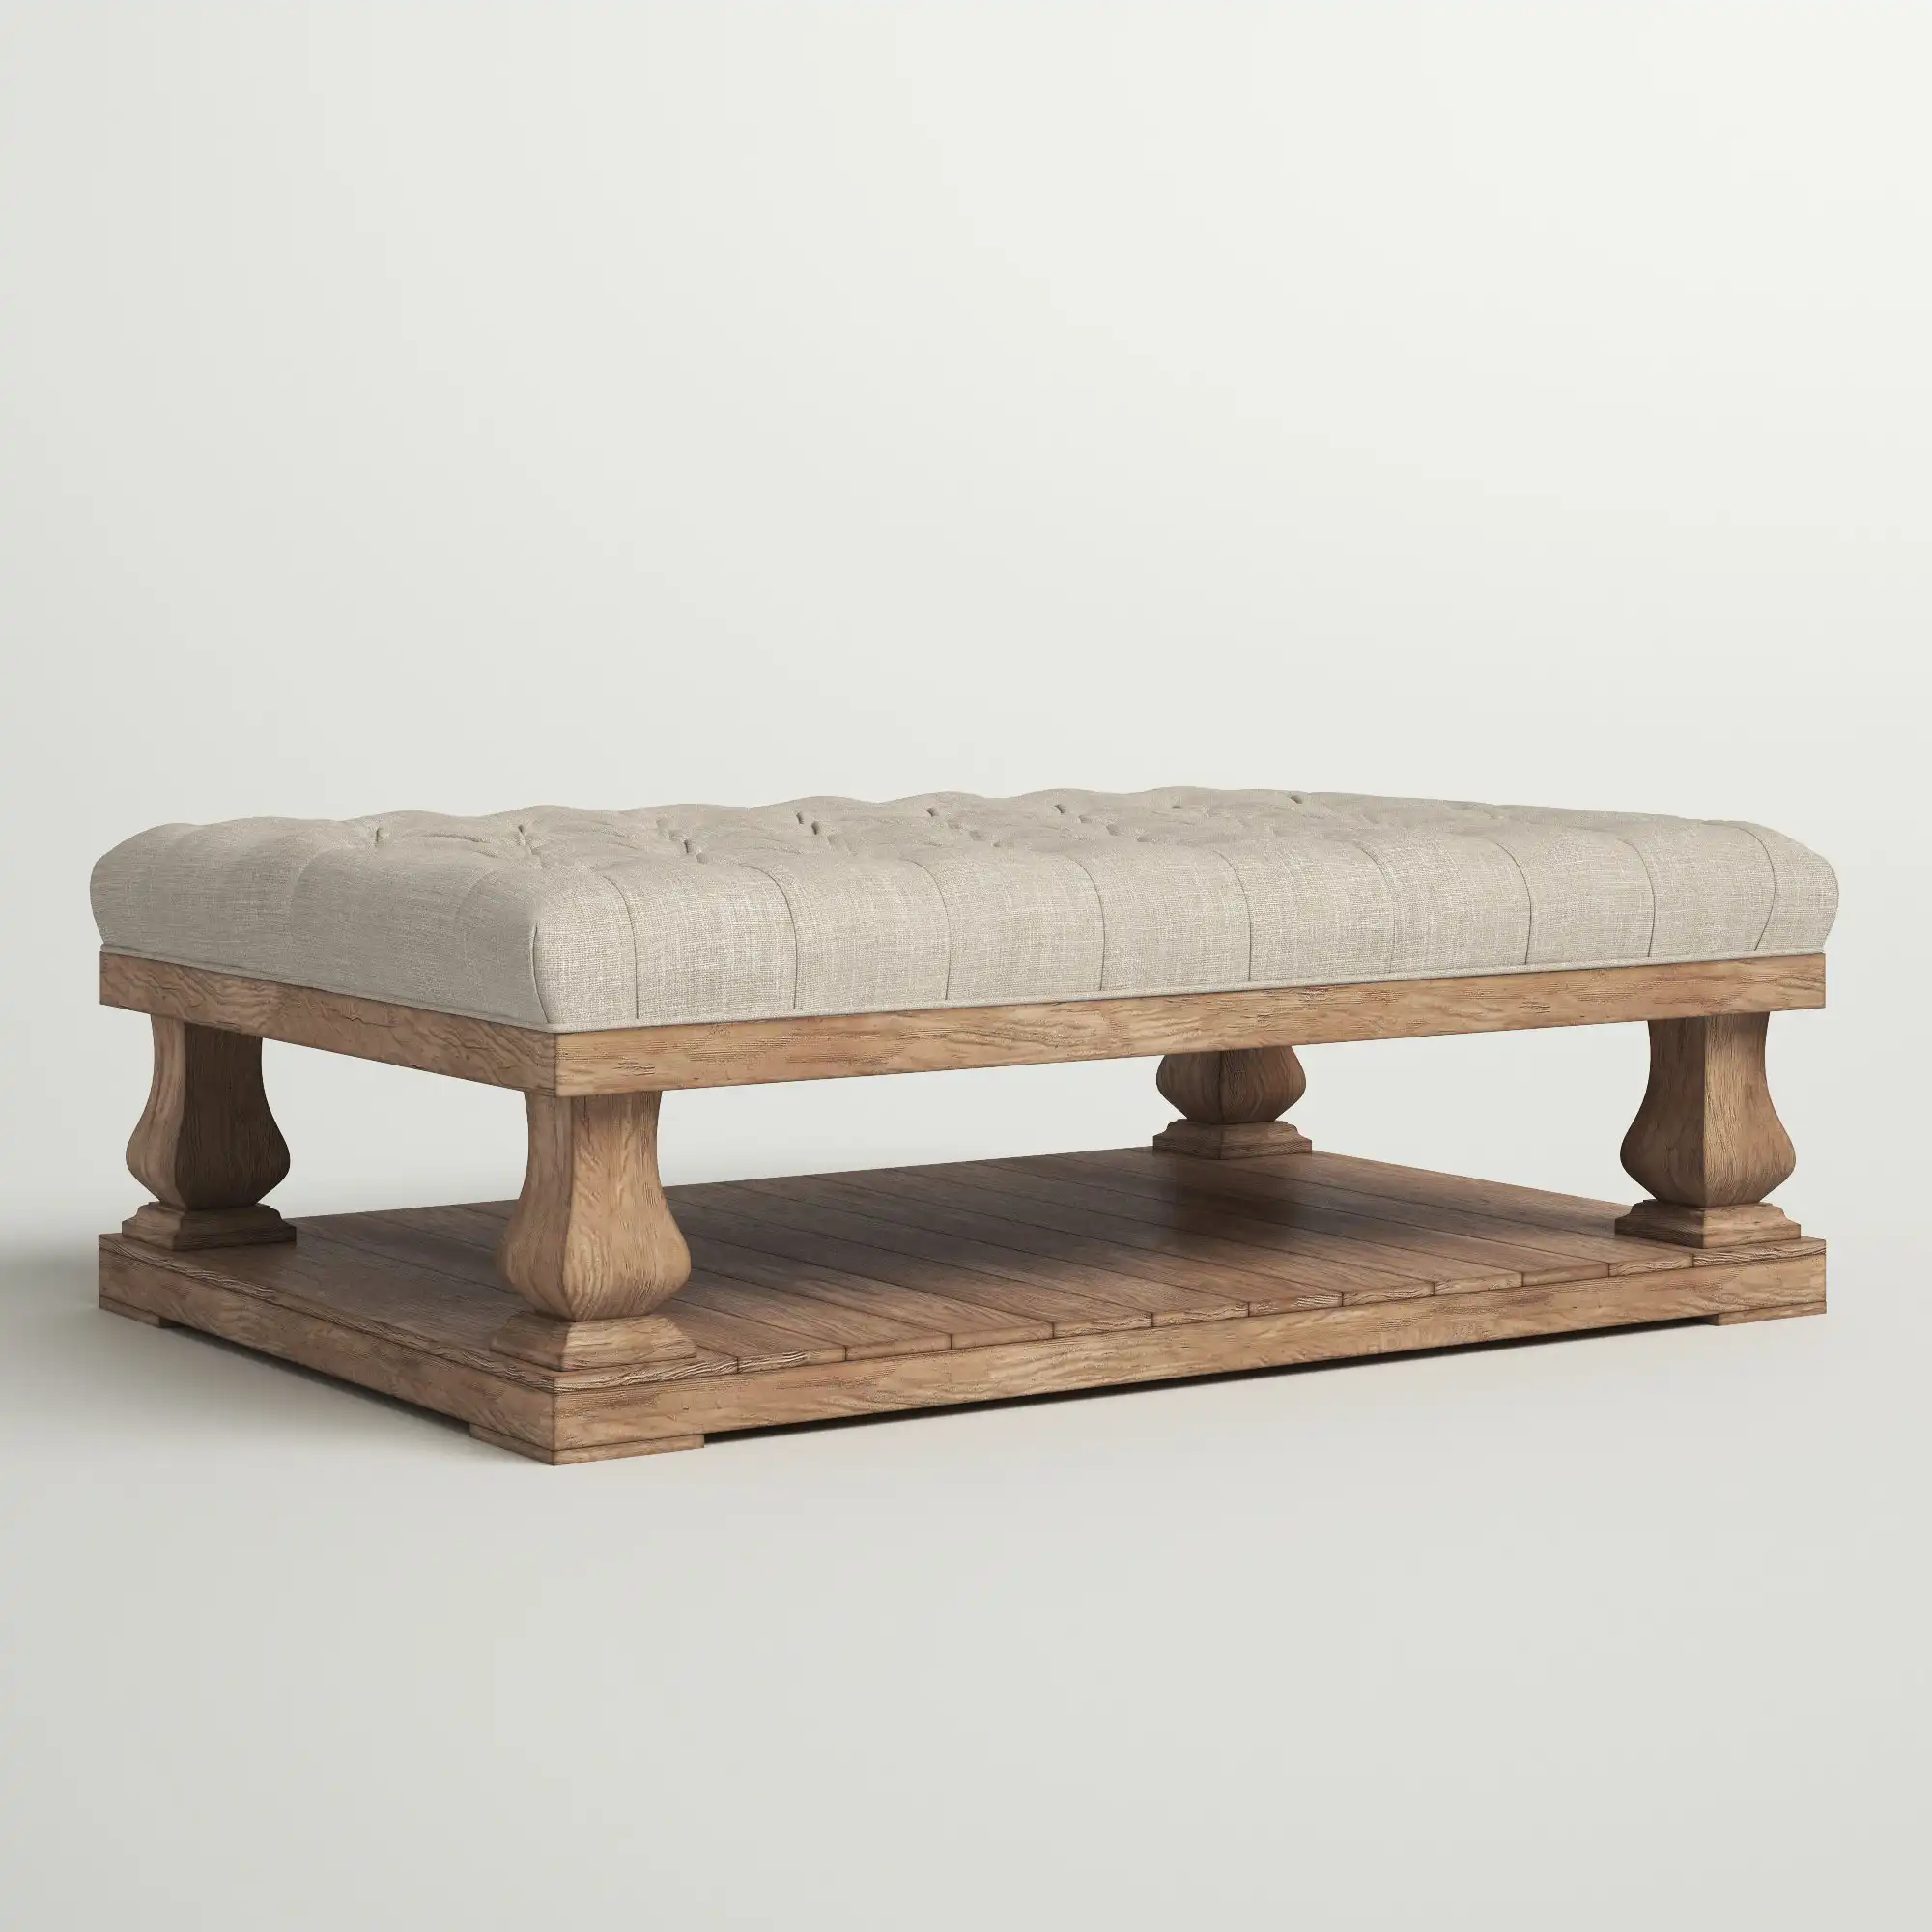 Upholstered French Country Coffee Table